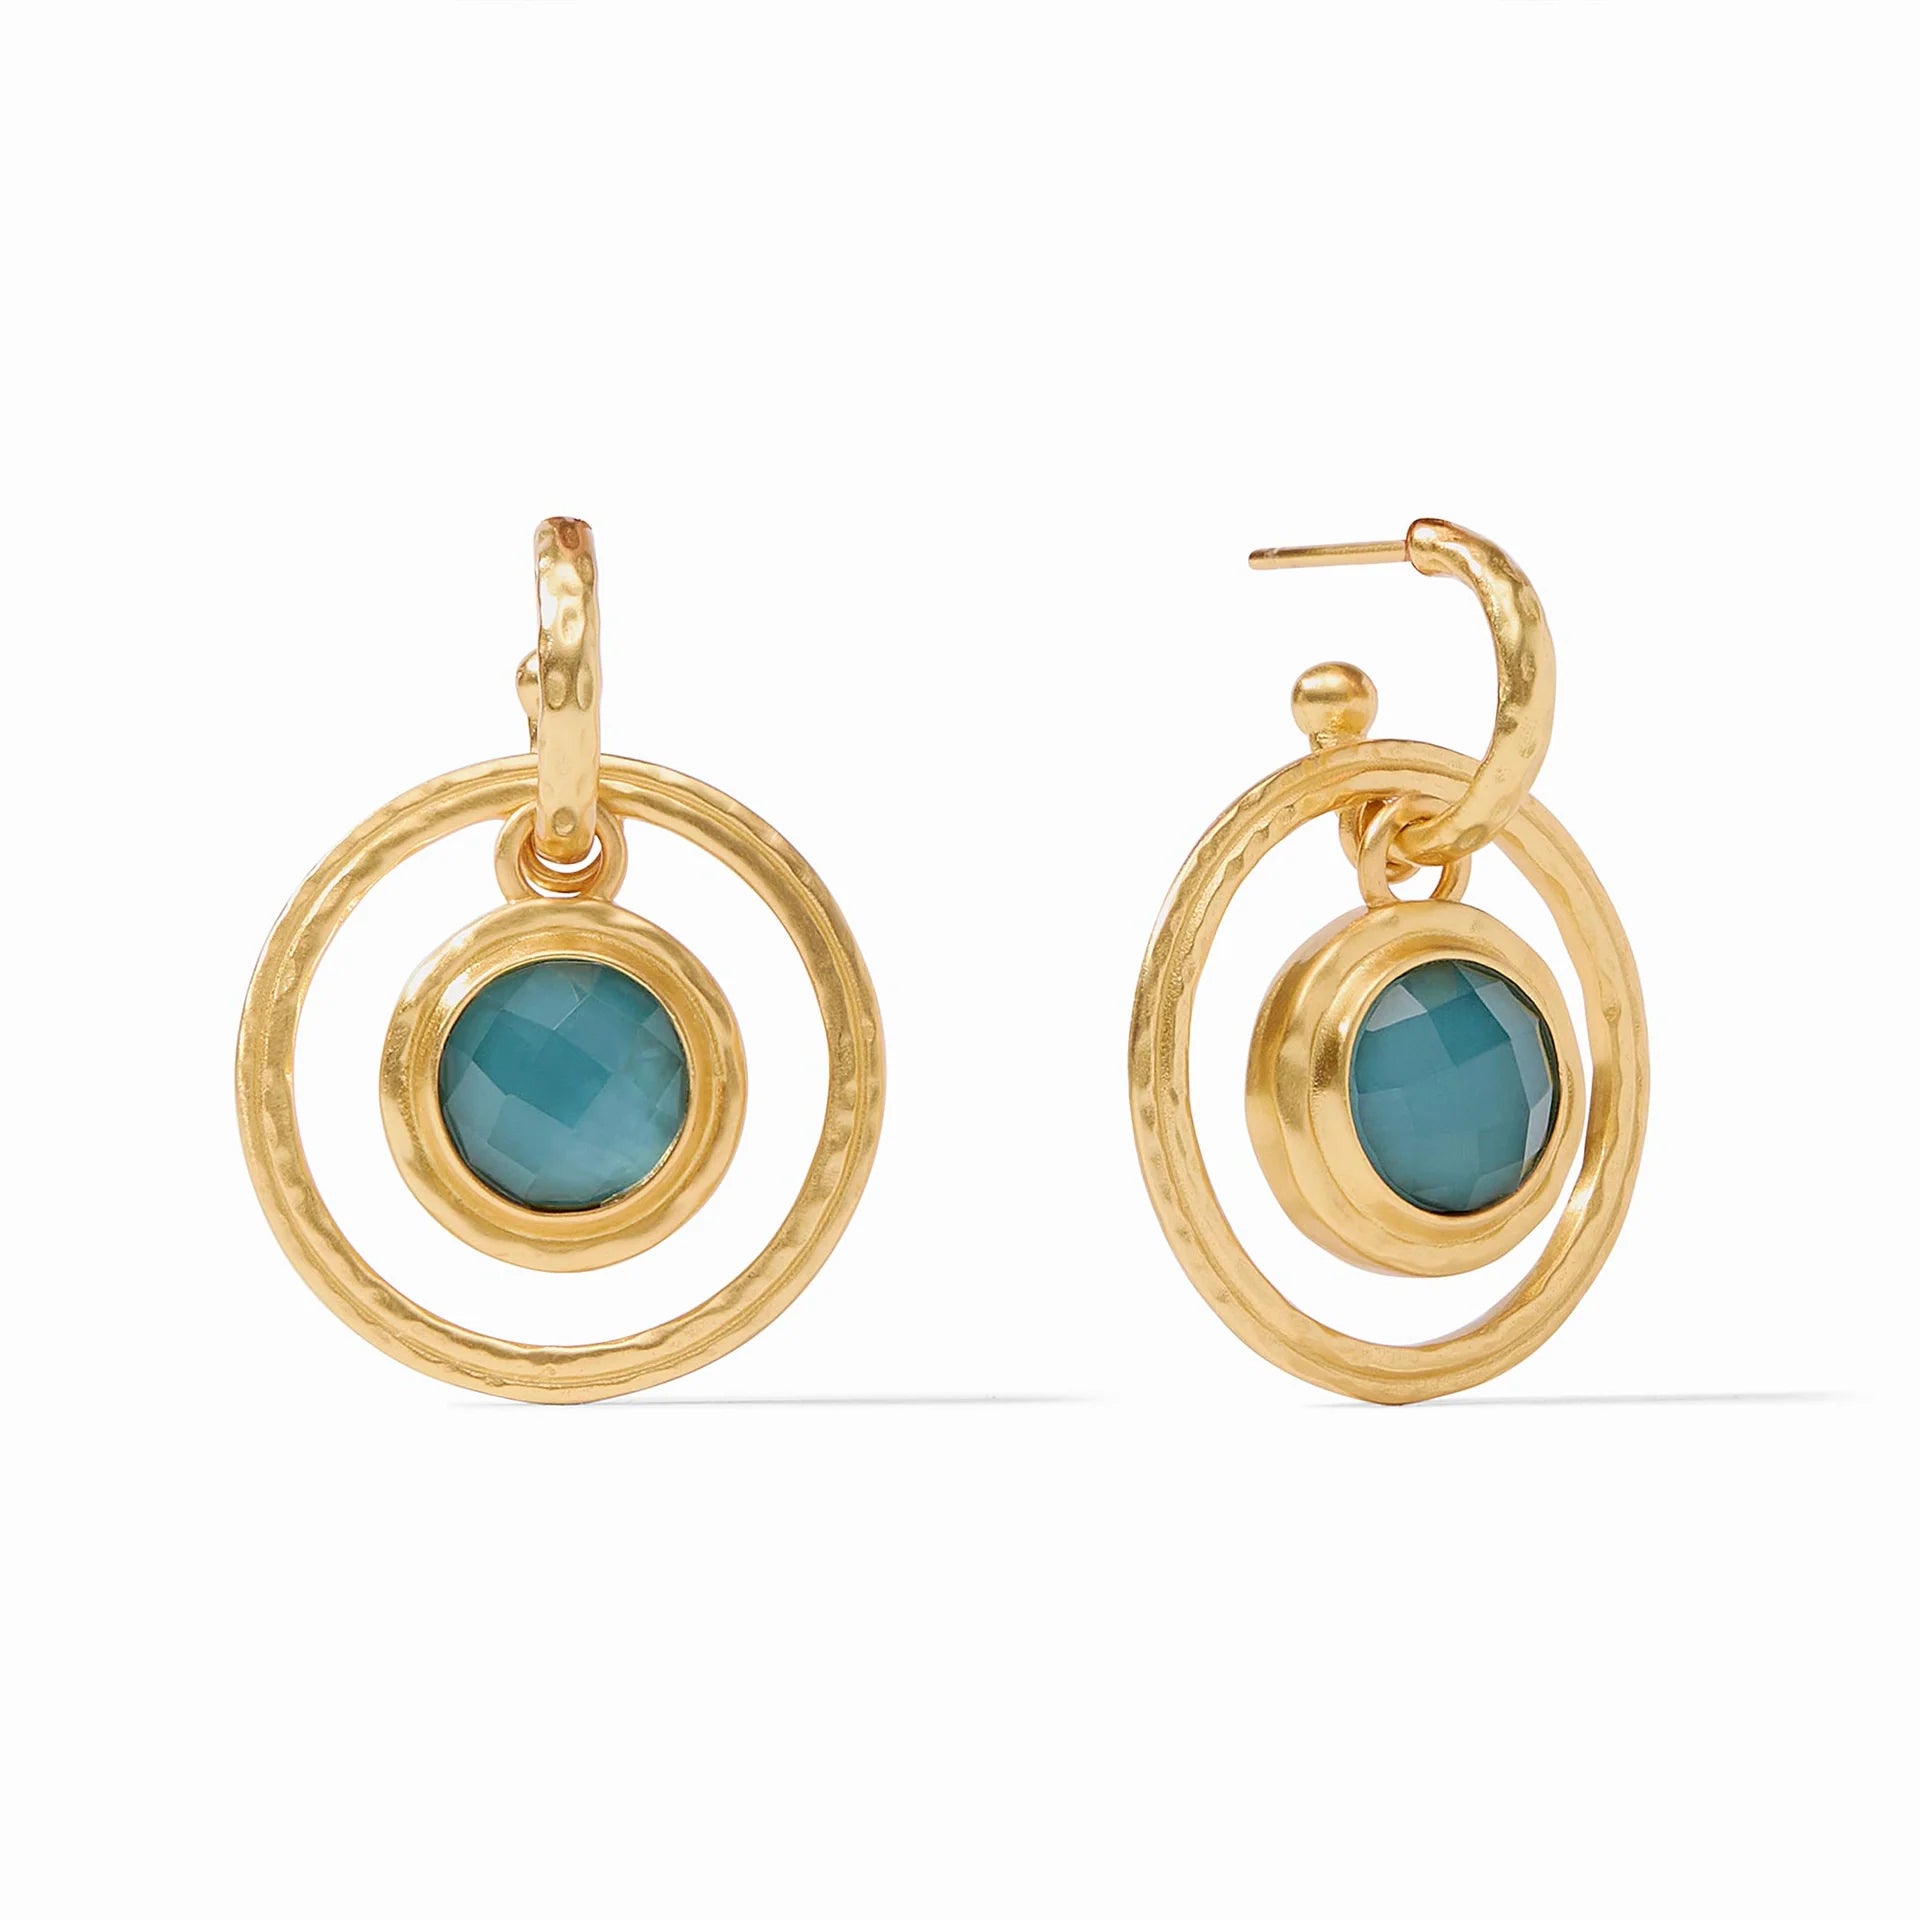 Astor 6-in-1 Charm Earring - Iridescent Peacock Blue - OS